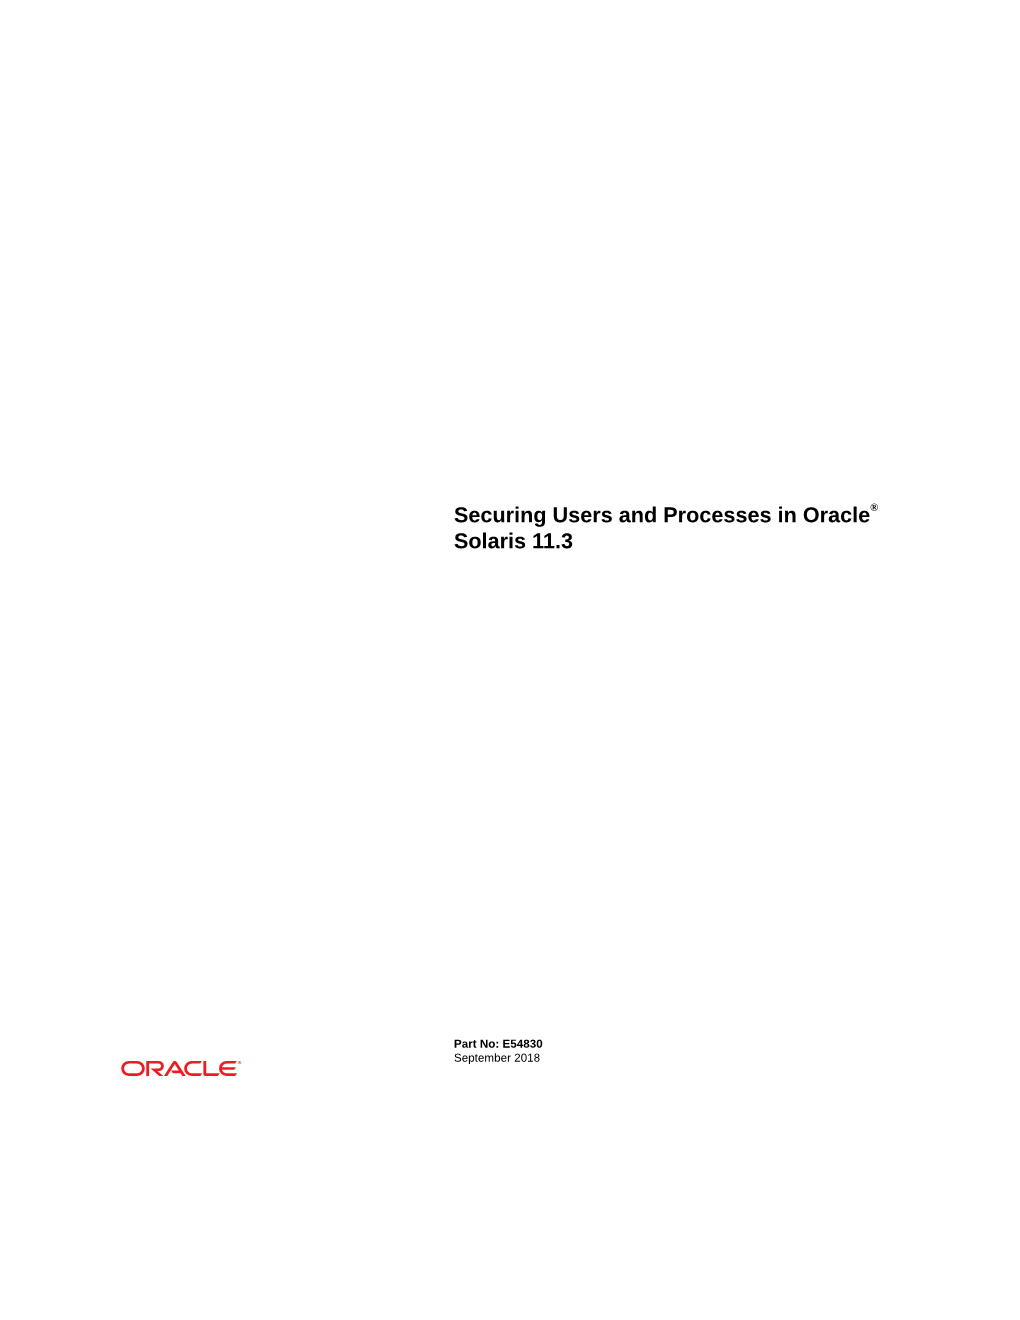 Securing Users and Processes in Oracle® Solaris 11.3